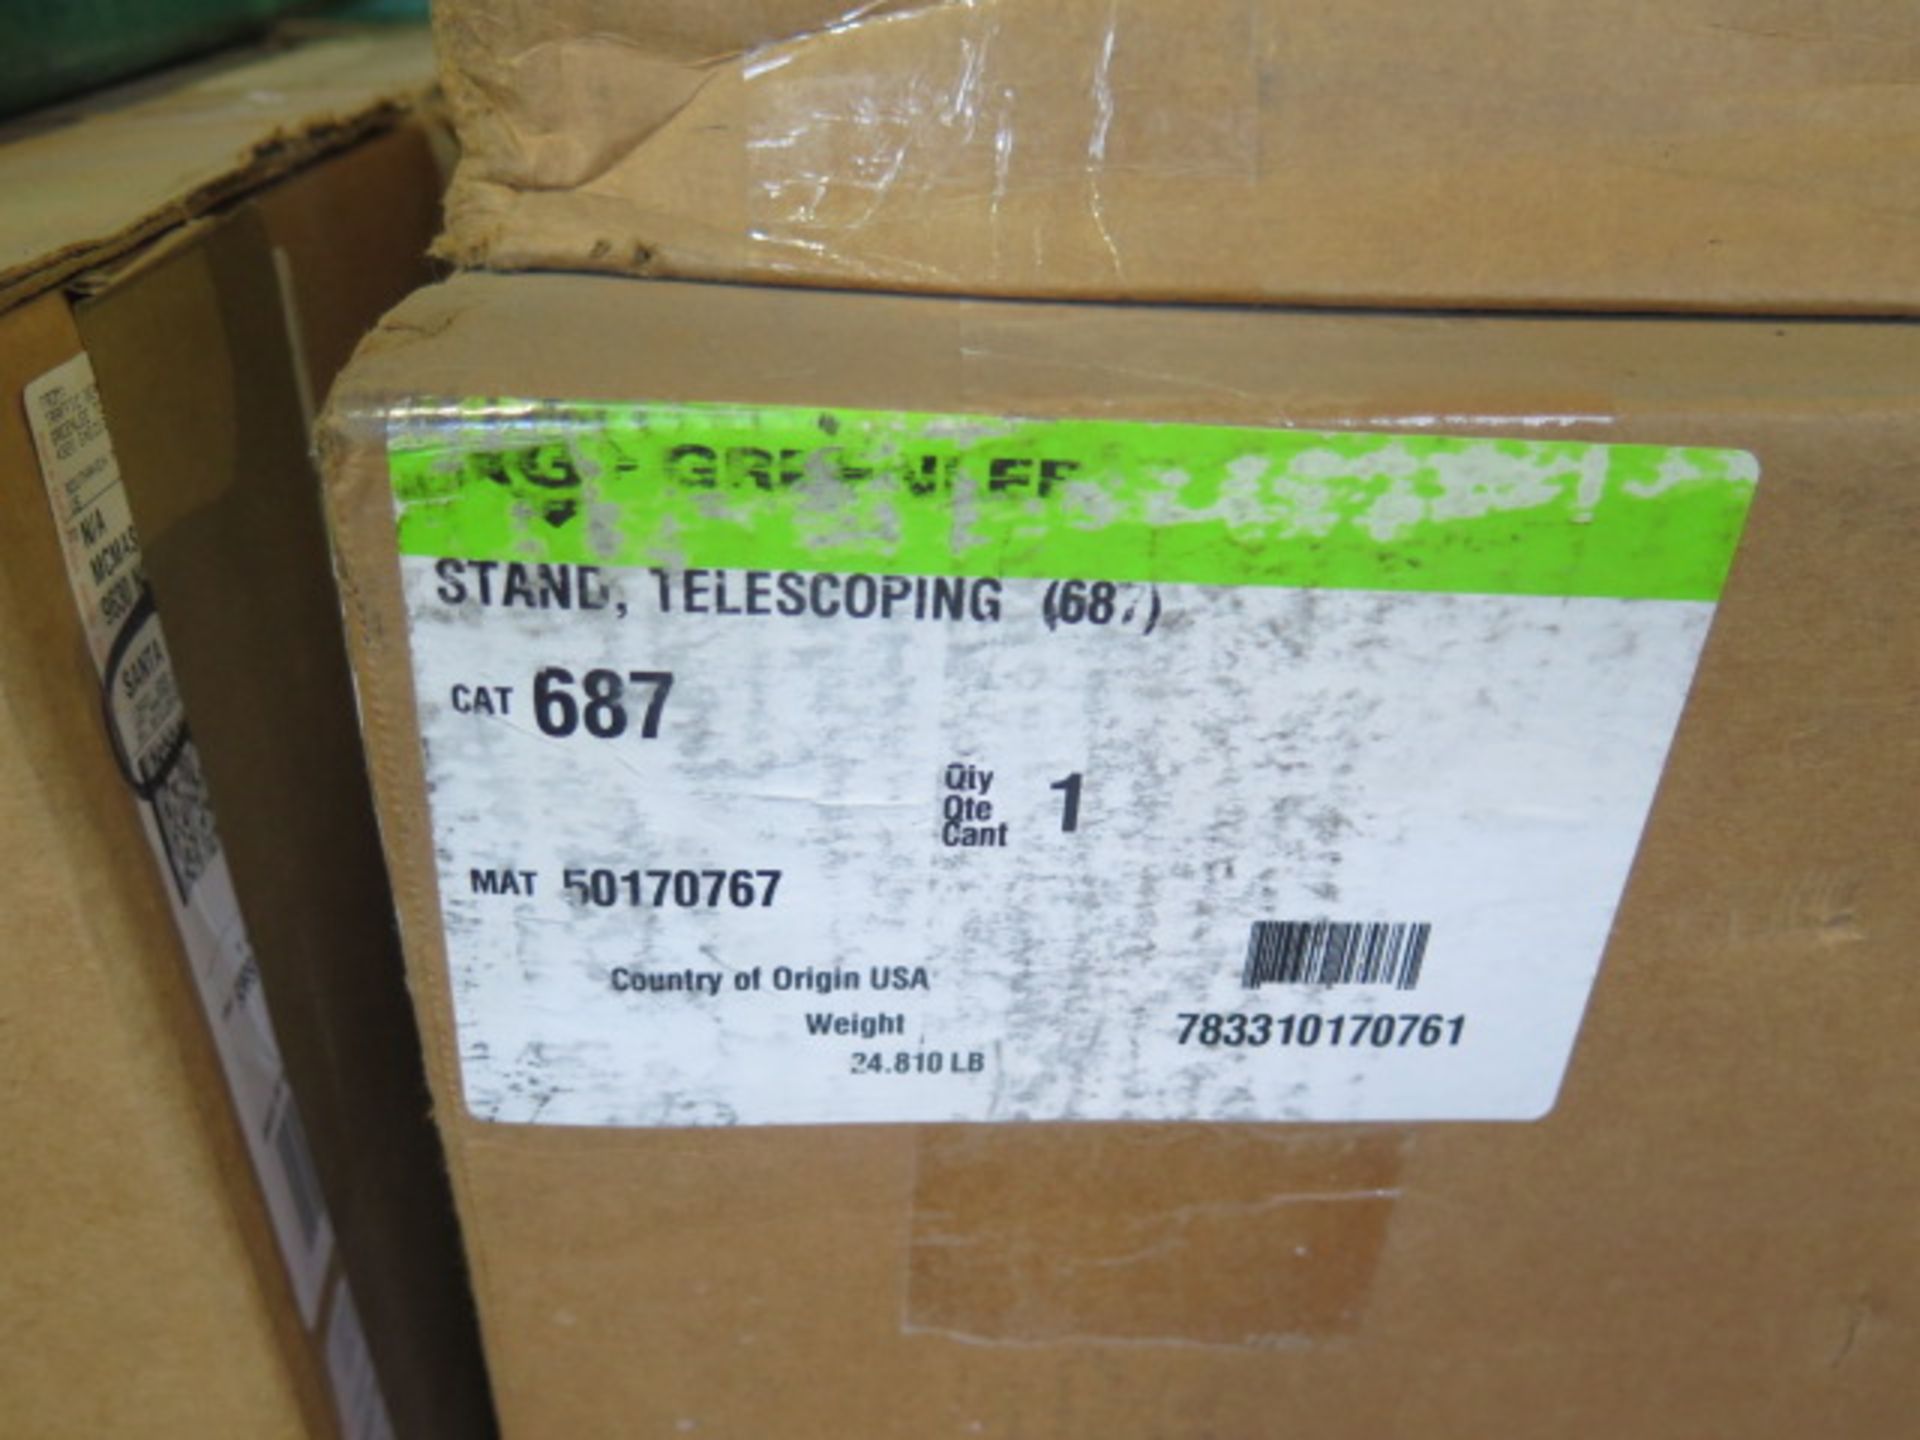 Greenlee mdl. 687 Telescoping Reel Stands (5 NEW) (4 USED) (SOLD AS-IS - NO WARRANTY) - Image 7 of 9